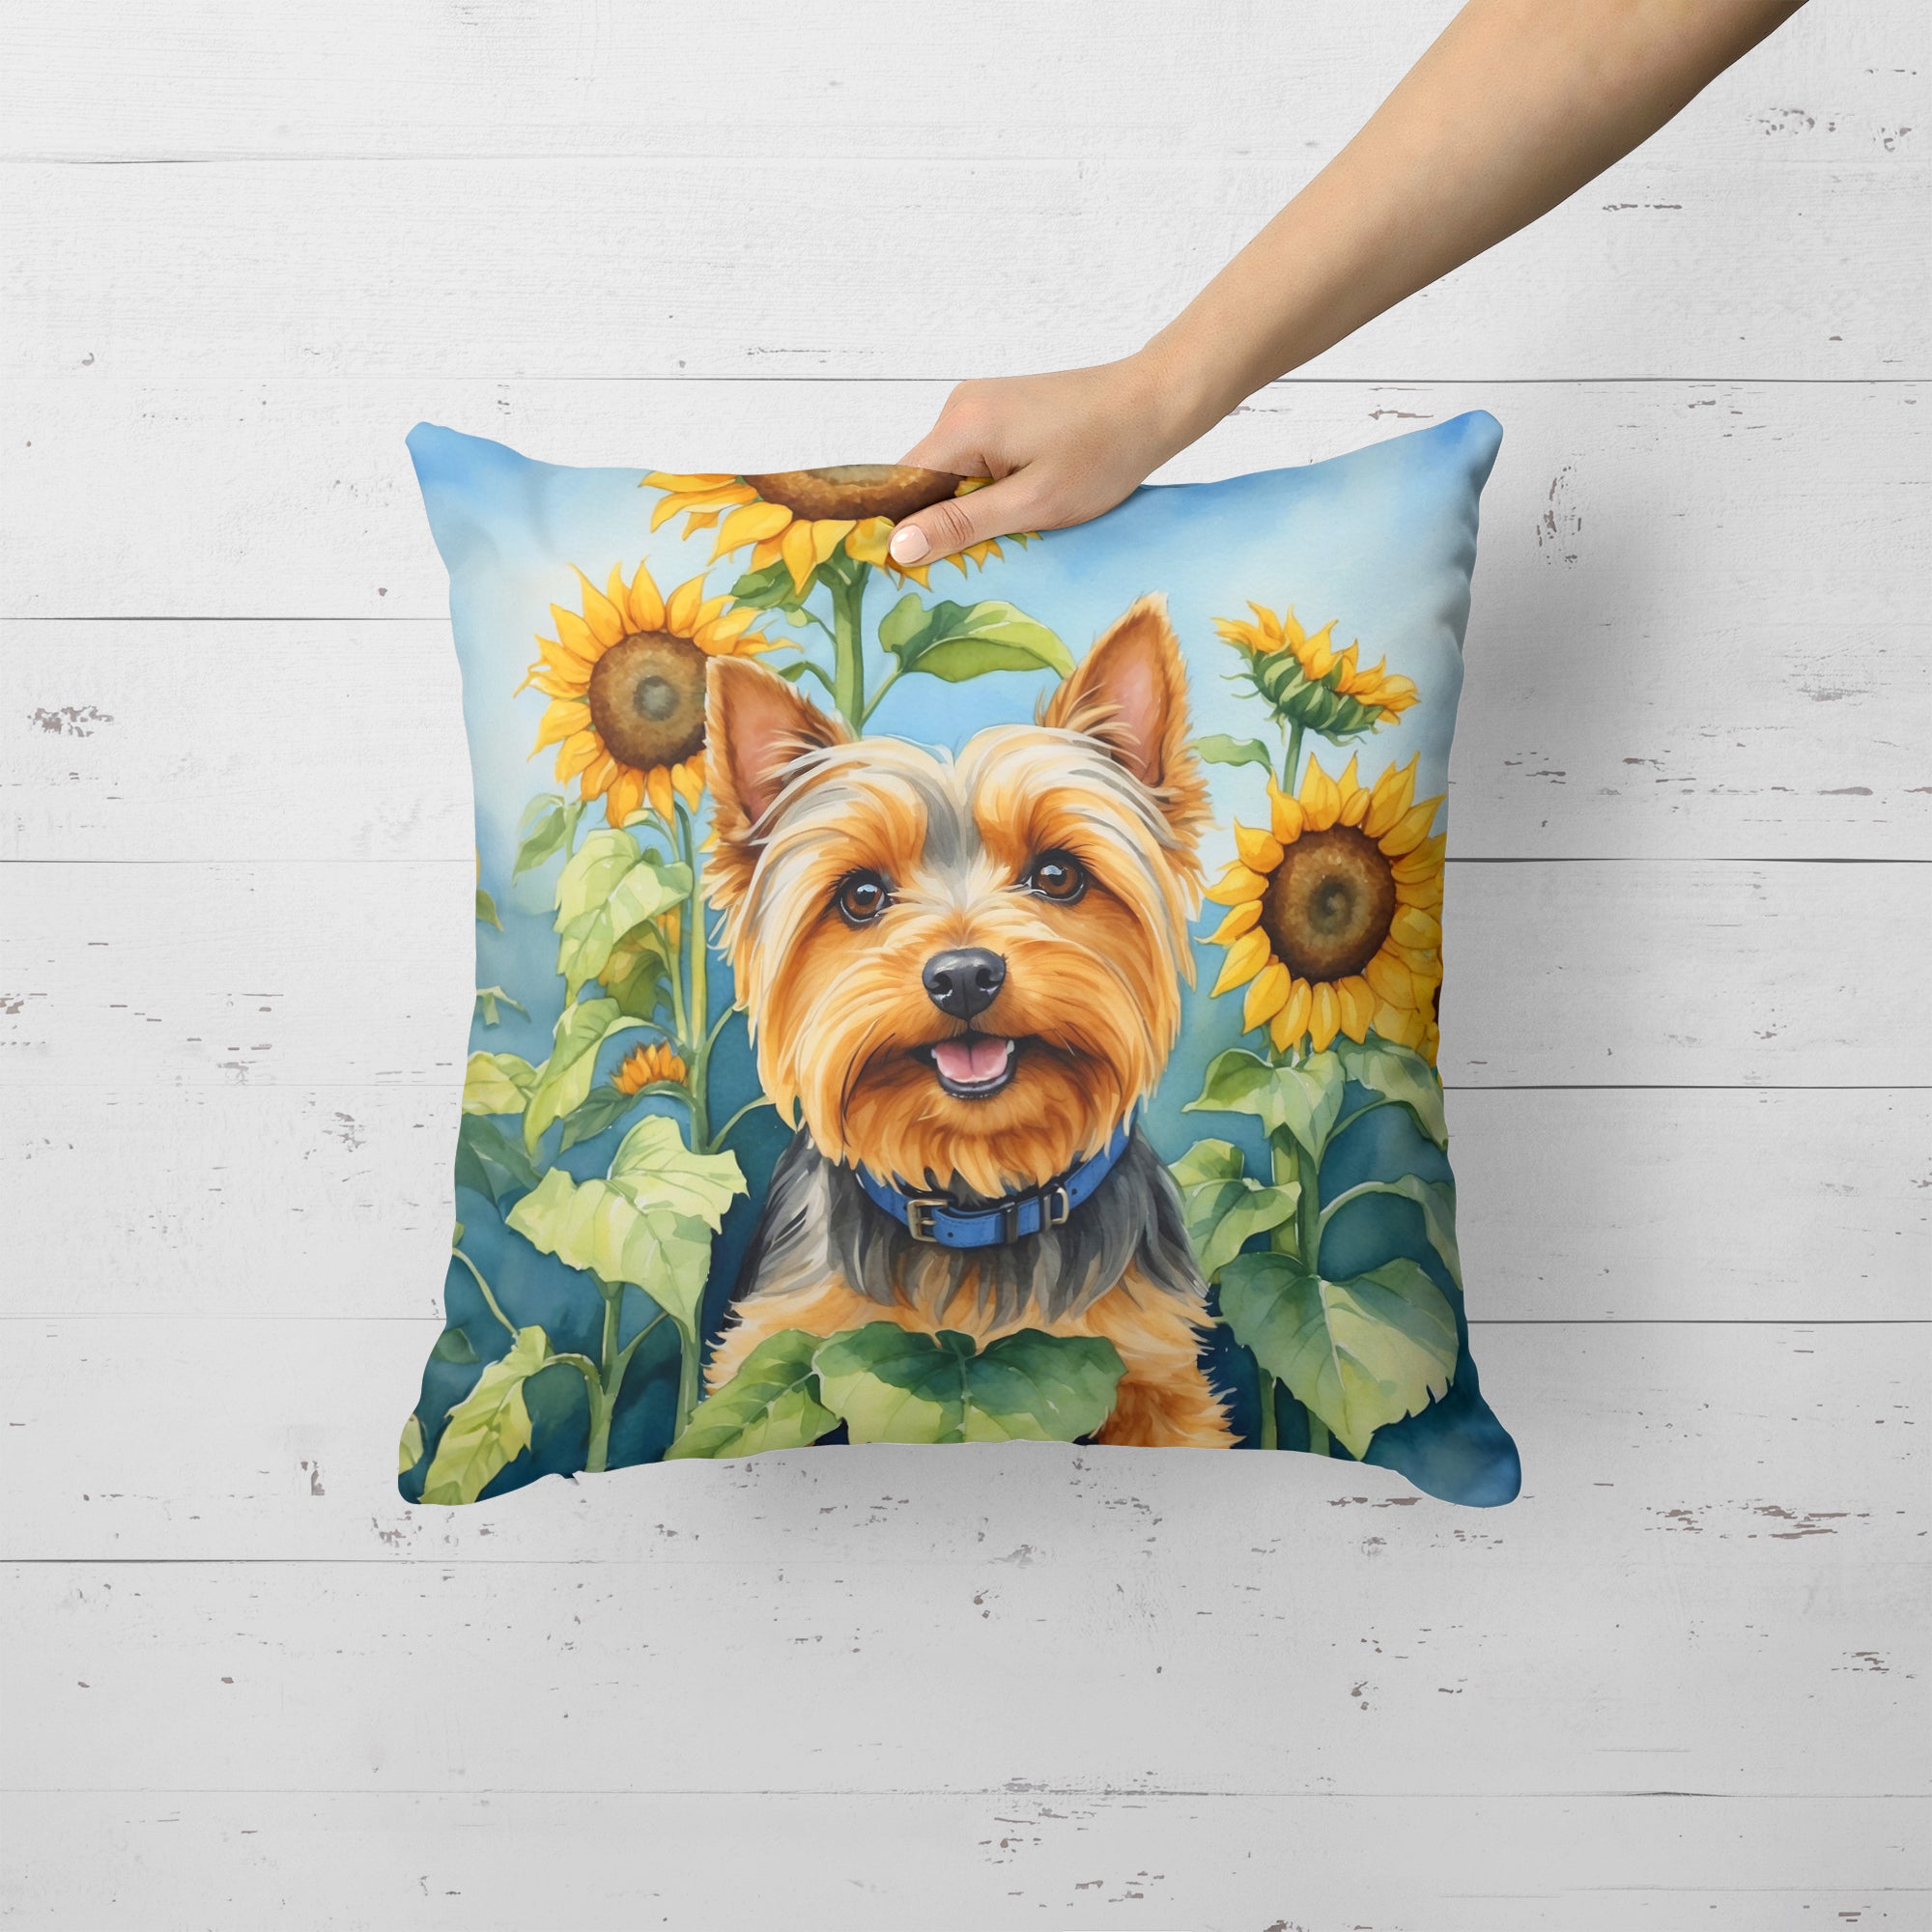 Buy this Silky Terrier in Sunflowers Throw Pillow